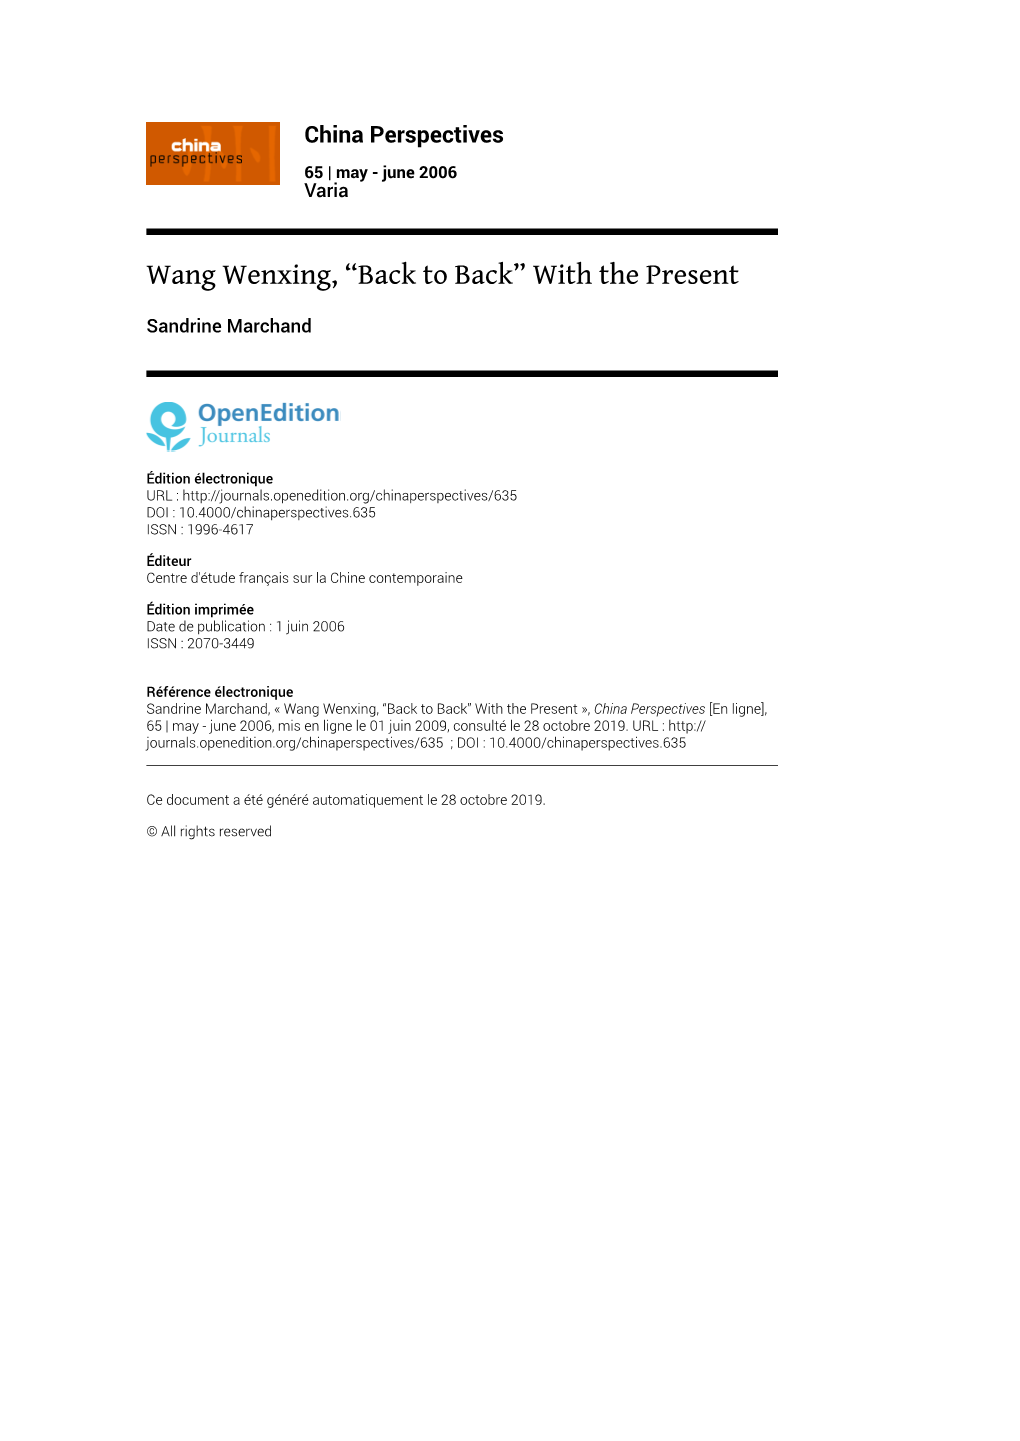 China Perspectives, 65 | May - June 2006 Wang Wenxing, “Back to Back” with the Present 2